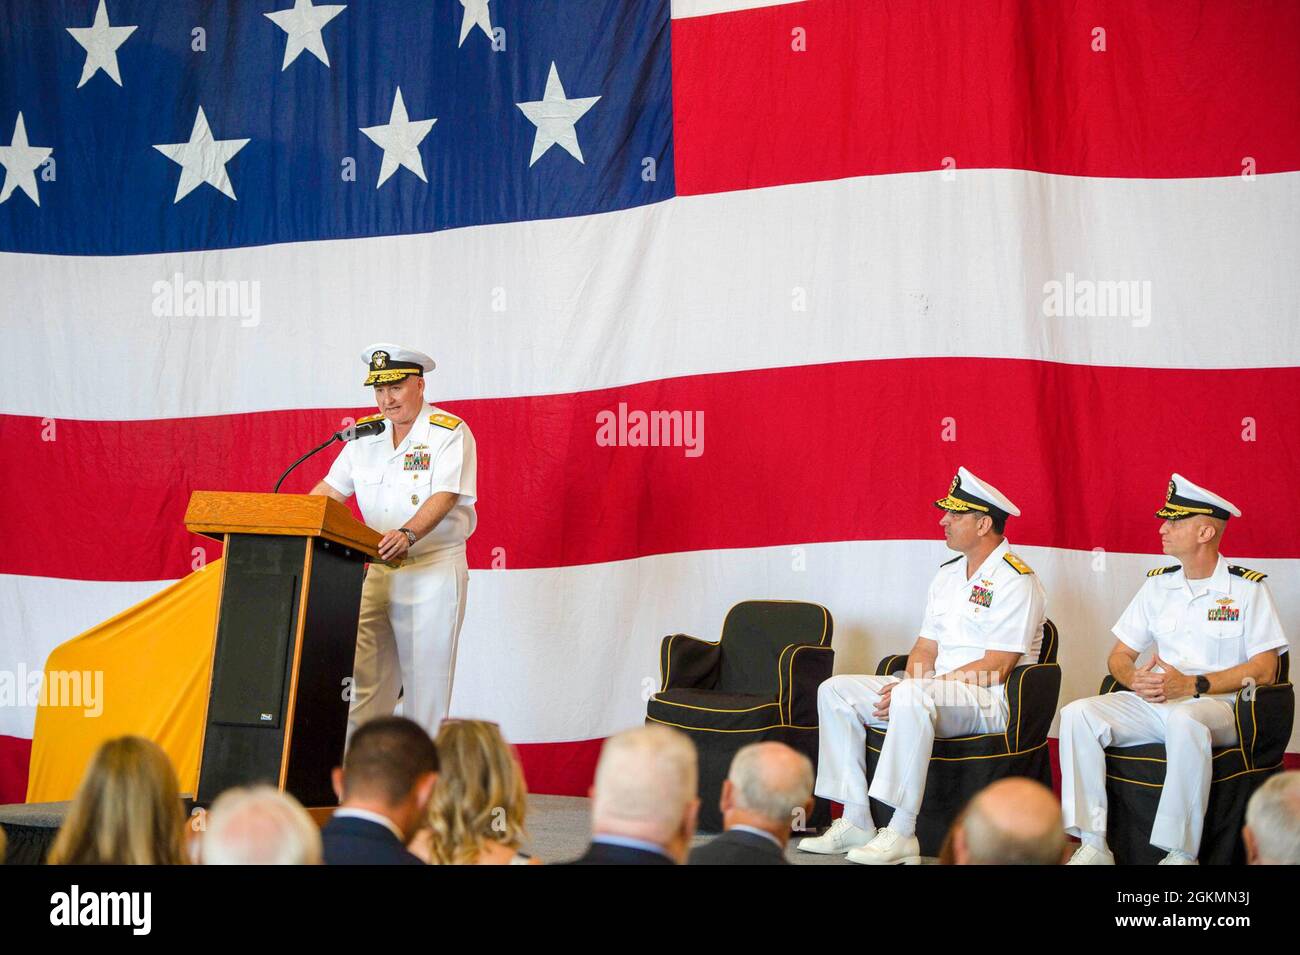 210528-N-IW069-1079 SAN DIEGO (May 28, 2021) Rear Adm. Timothy Kott, Commander, Carrier Strike Group ONE, delivers remarks during a change of command ceremony, May 28, 2021. Carrier Strike Group ONE leads the Carl Vinson Carrier Strike Group with a team of ships, aircraft, and more than 60,000 Sailors, capable of carrying out missions around the globe. Vinson is currently pier side in its homeport of San Diego. Stock Photo